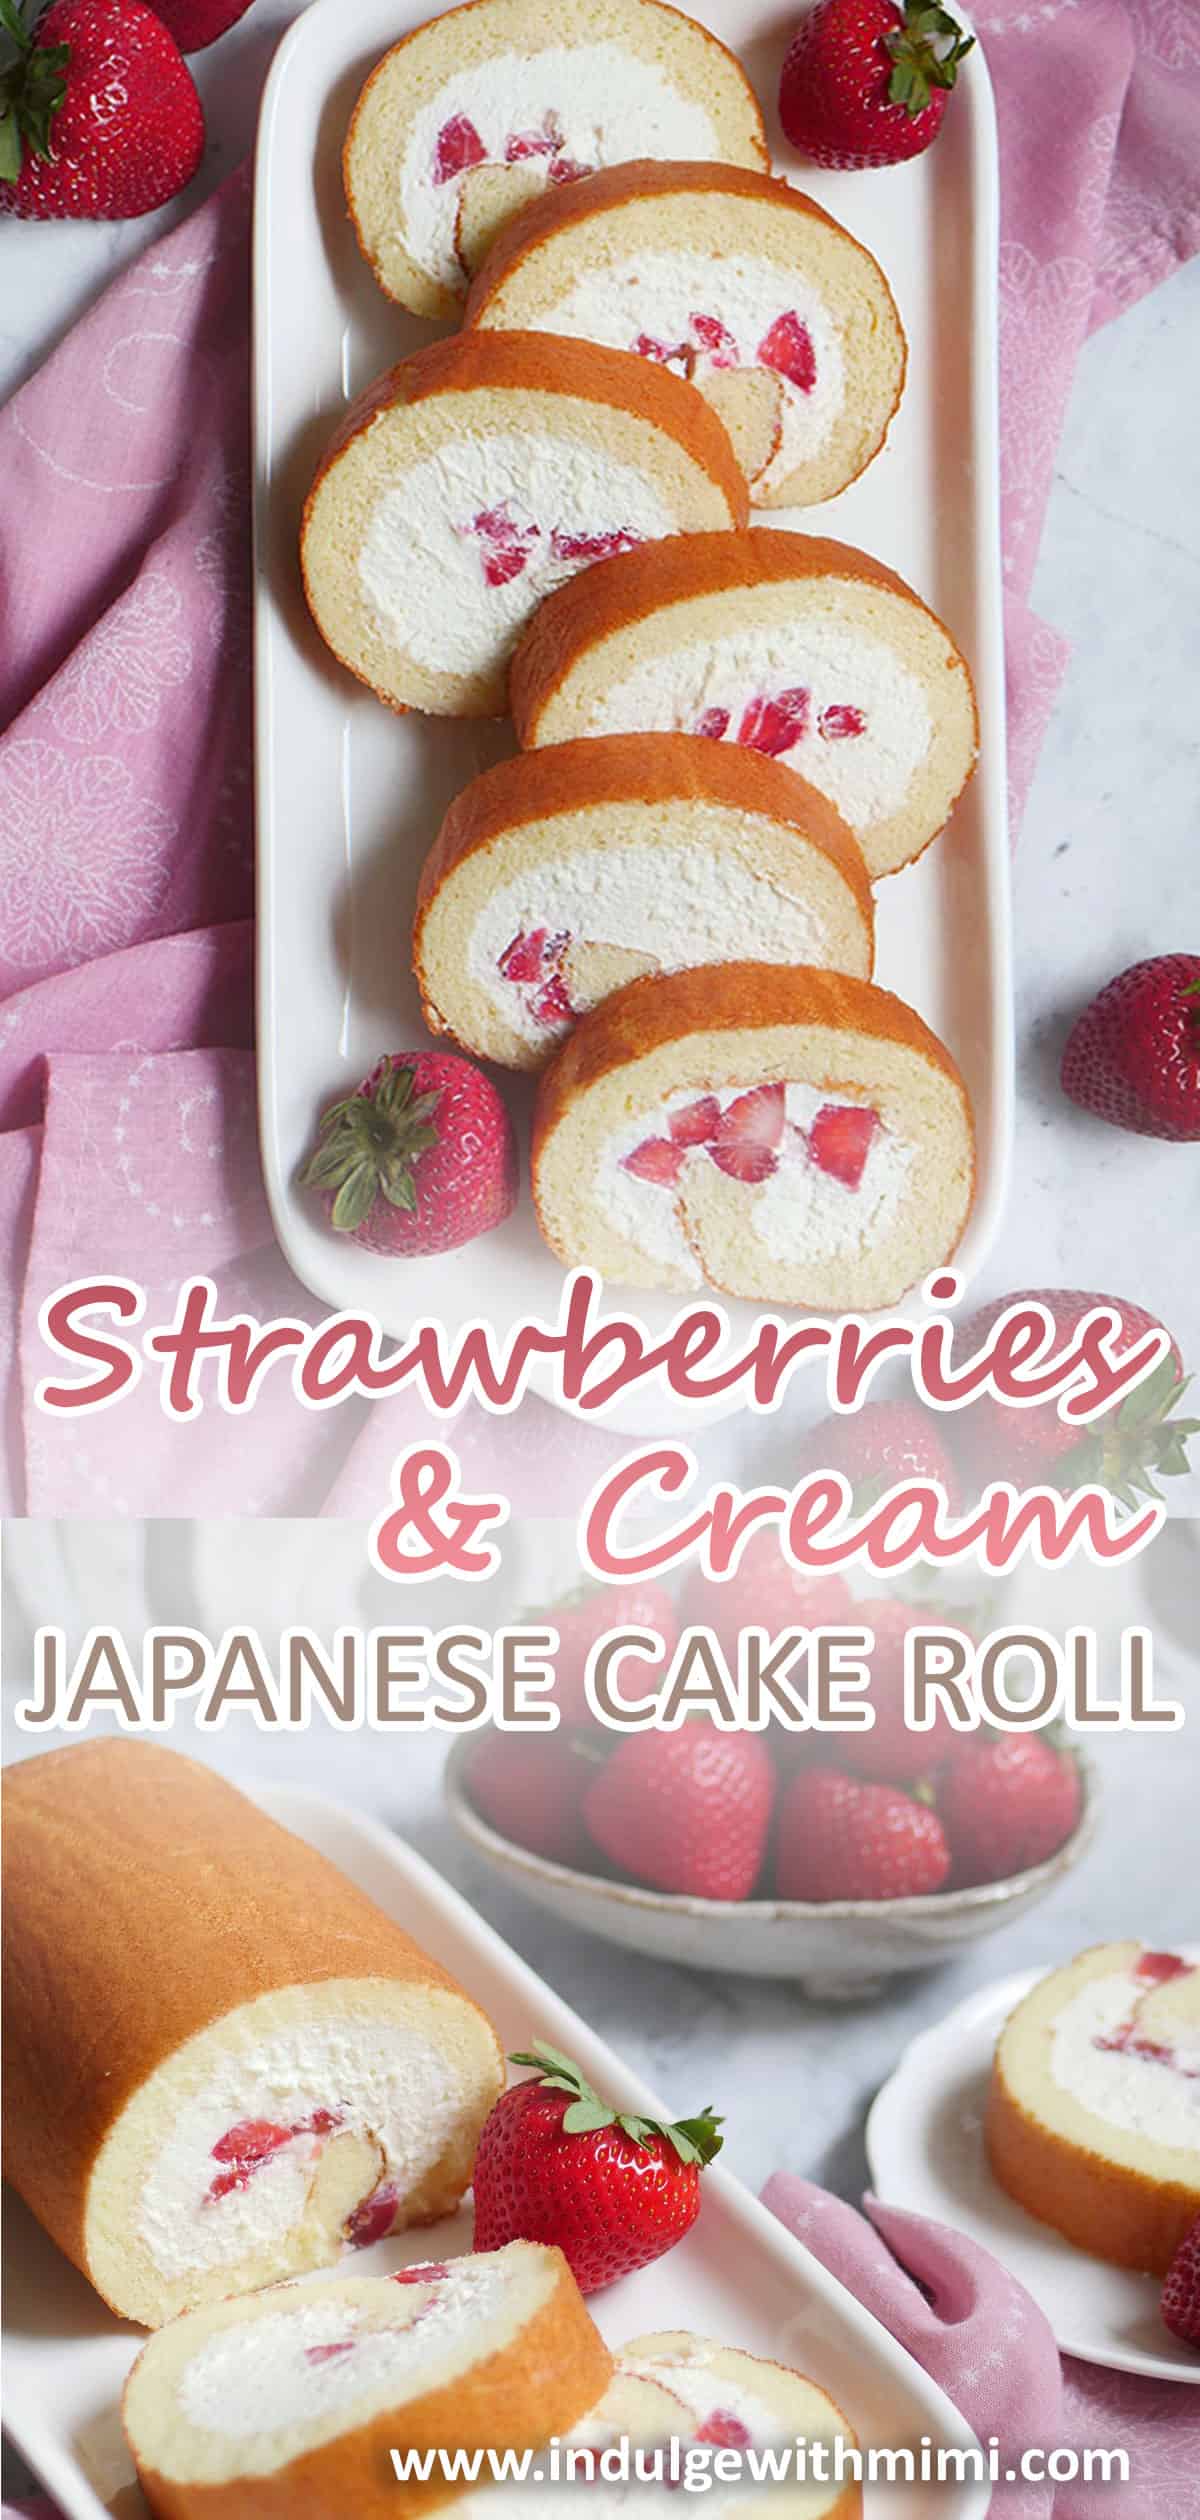 8 slices of strawberry cake roll cut open and presented on a long dish. 